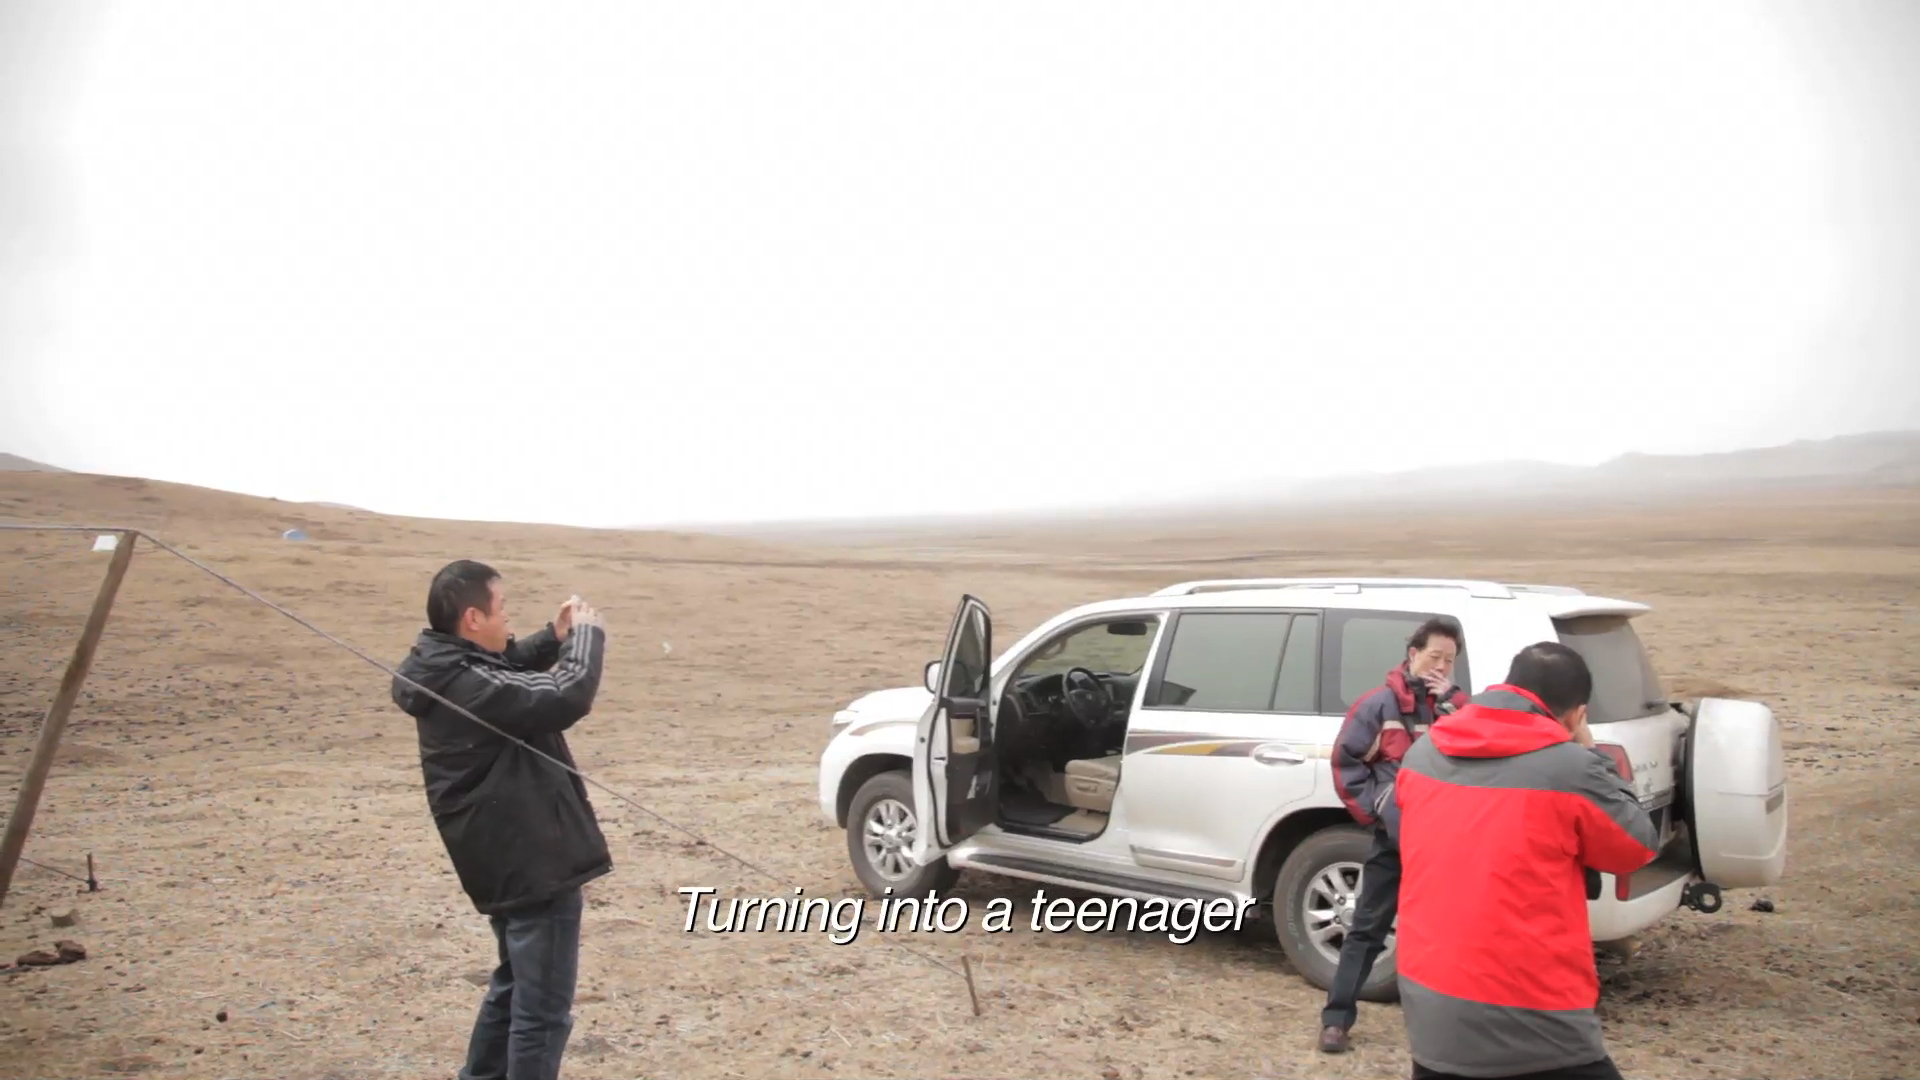 Shen Xin Counting Blessings 2014 Video still 2